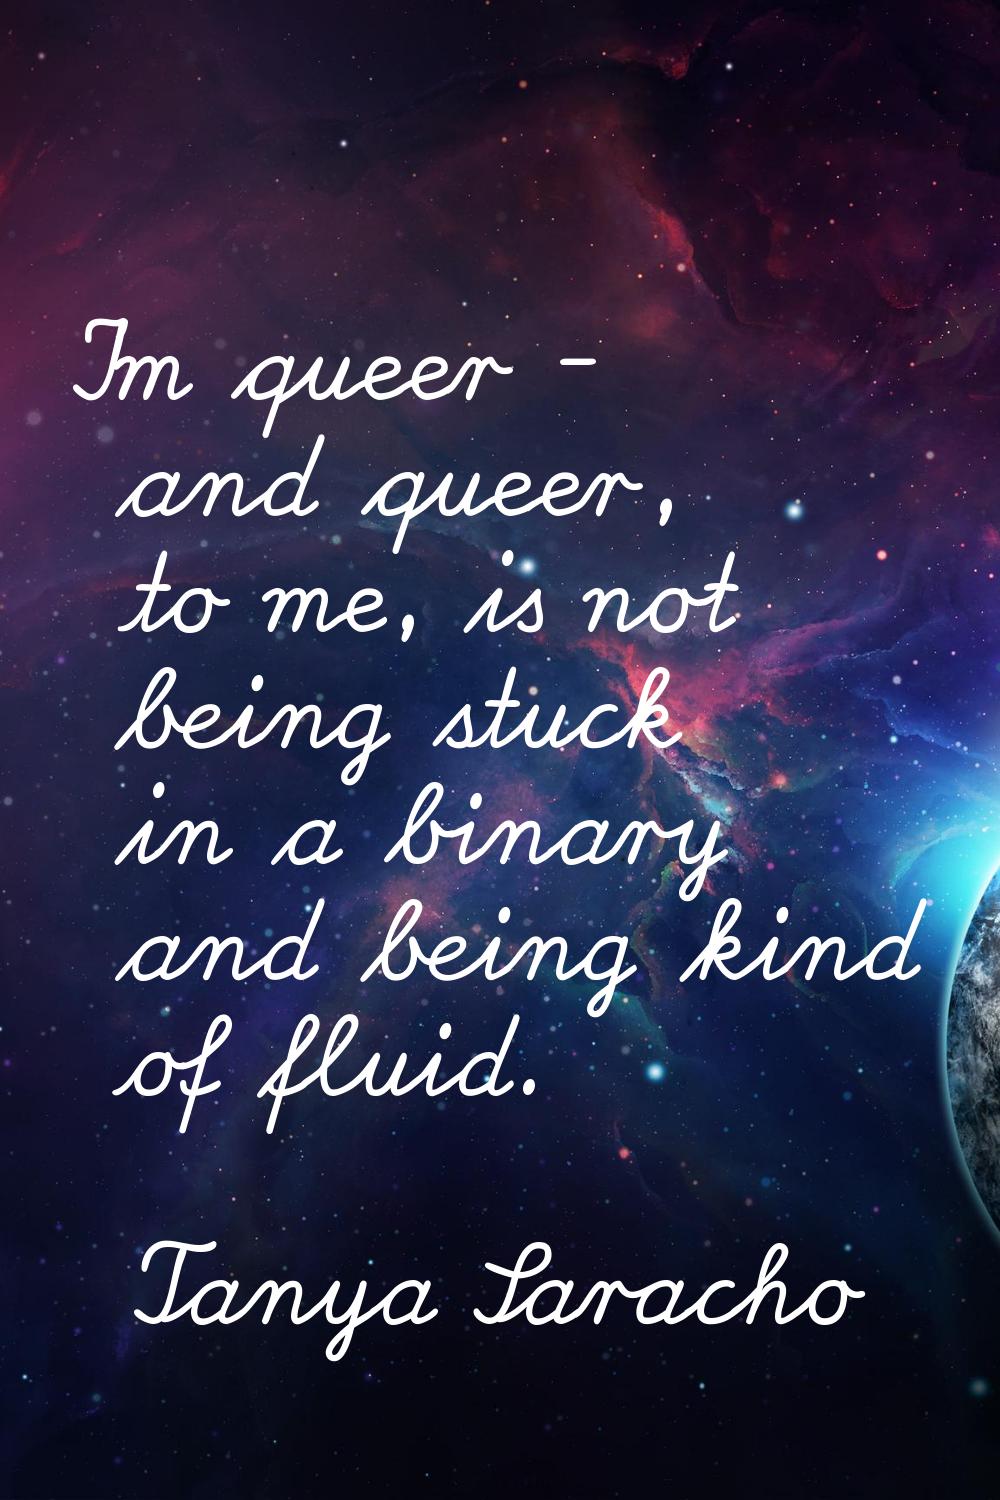 I'm queer - and queer, to me, is not being stuck in a binary and being kind of fluid.